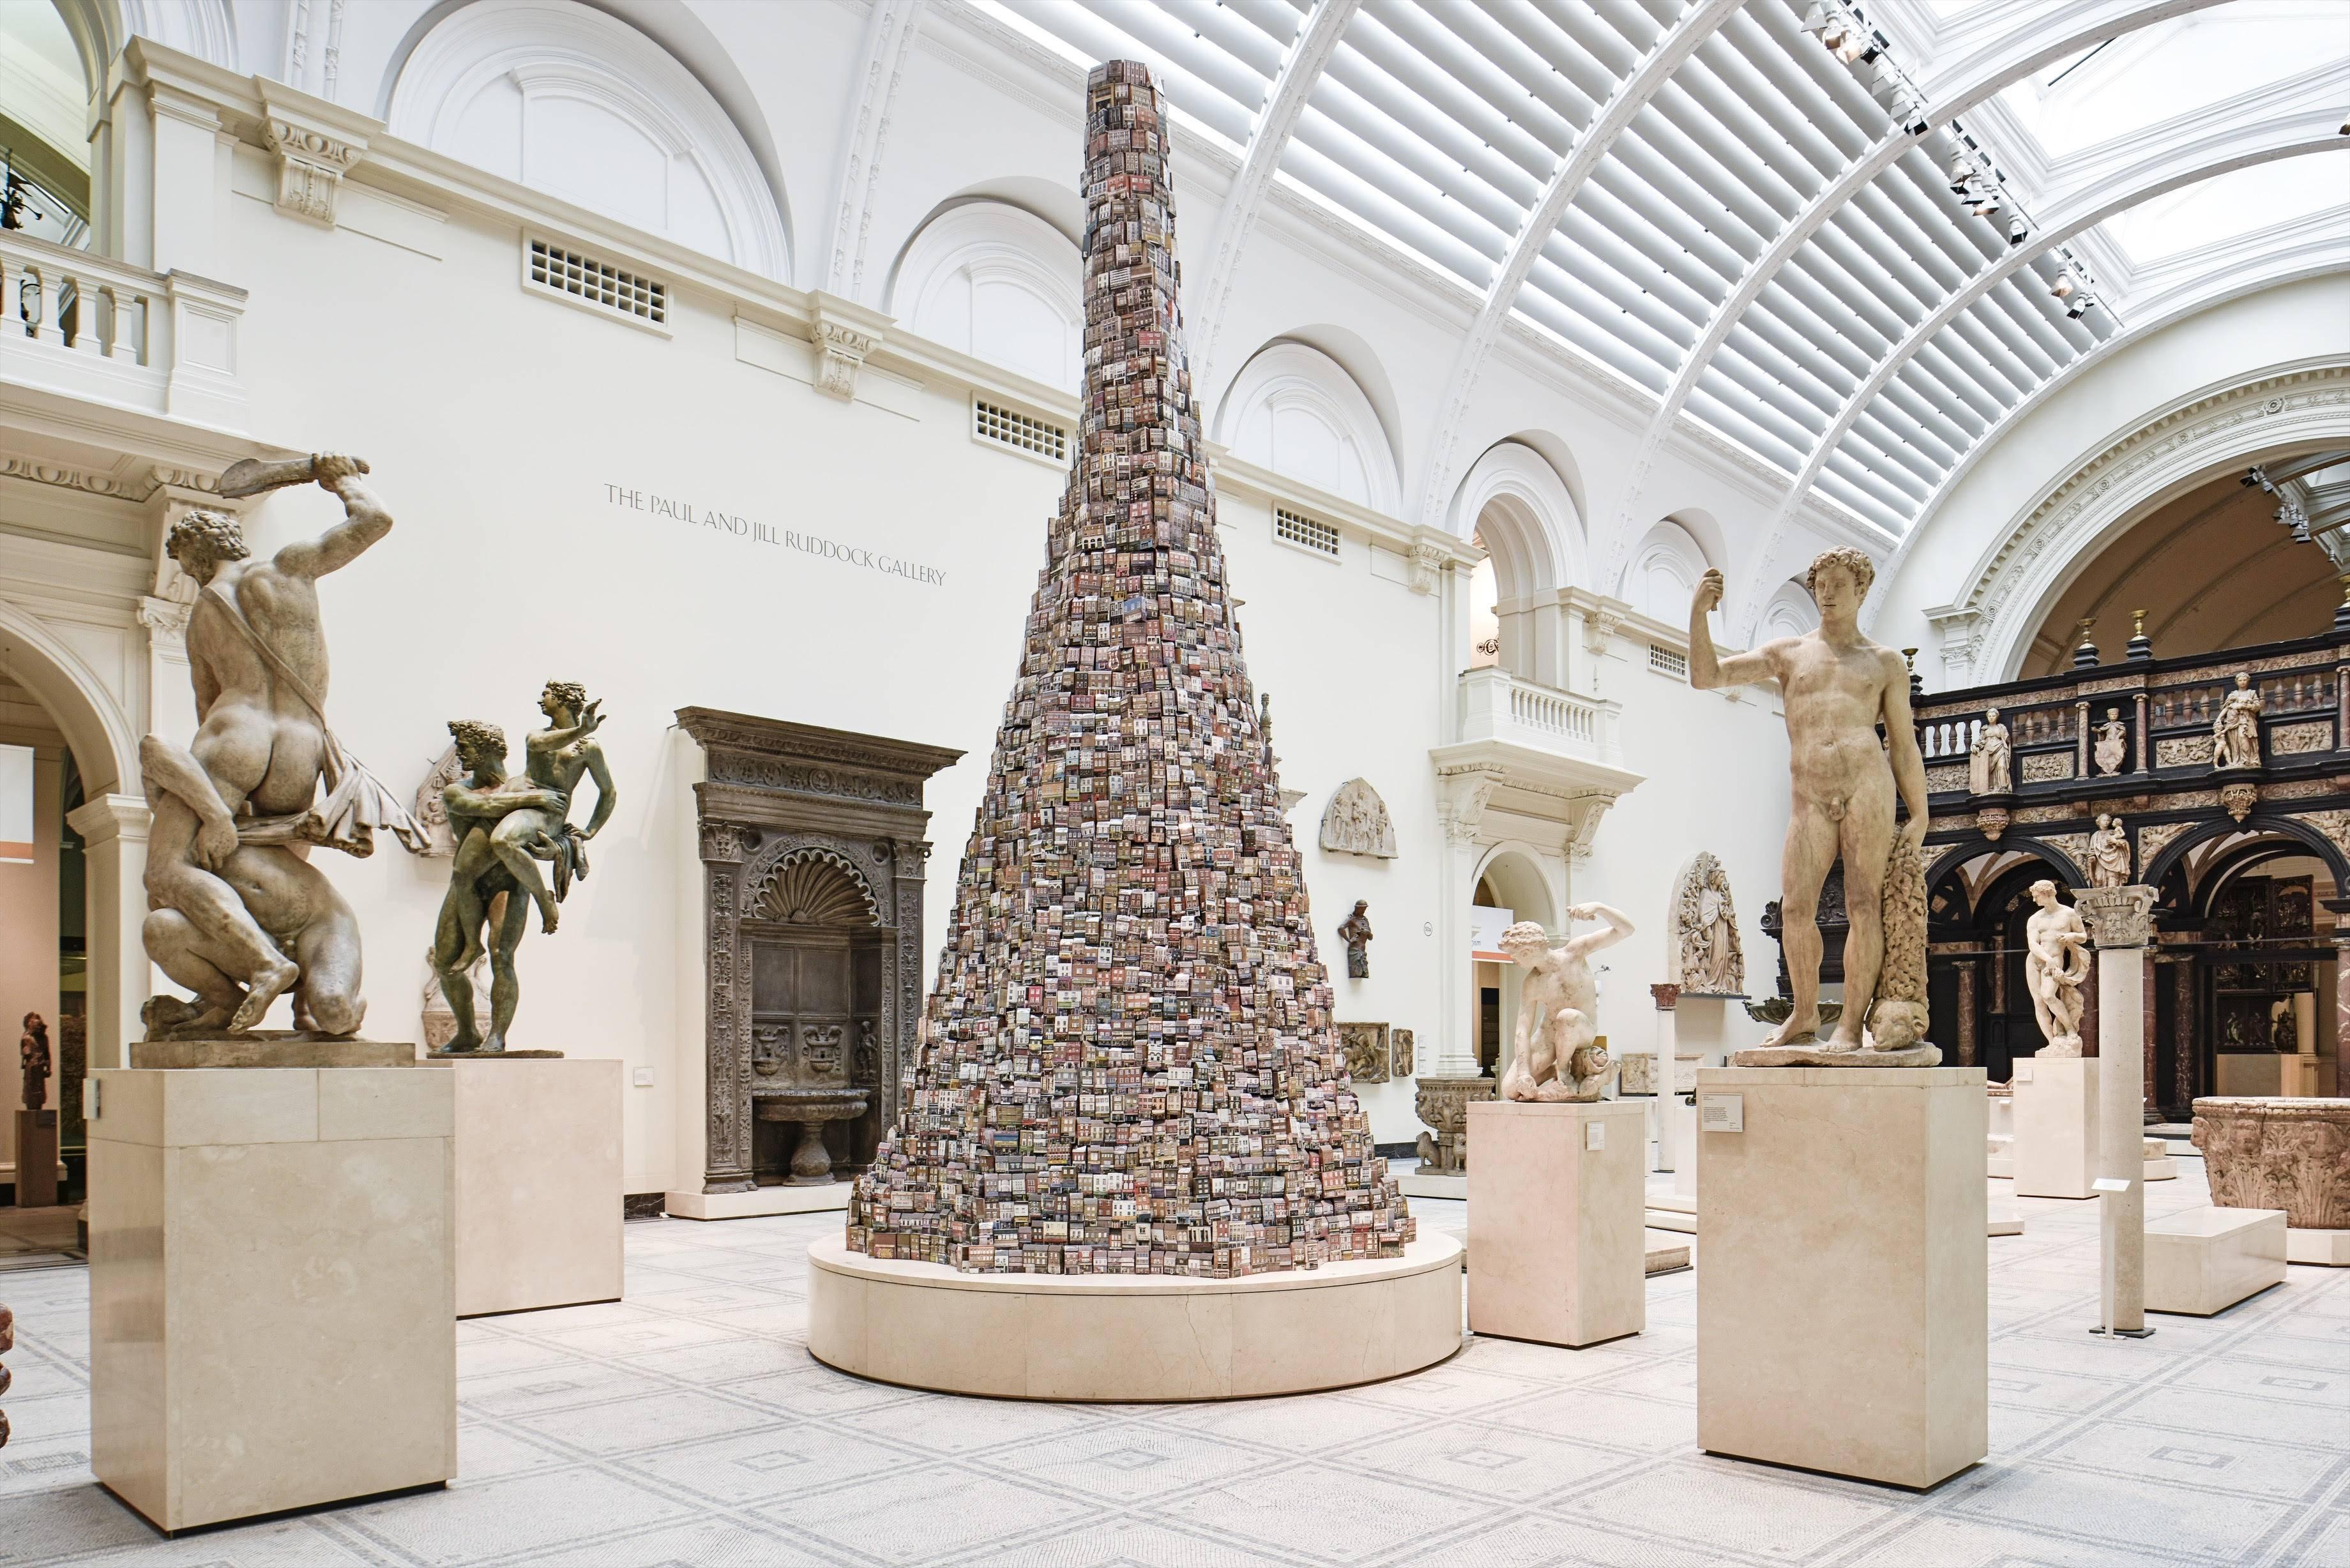 Created especially for the V&A by artist Barnaby Barford, The Tower of Babel was displayed in the V&A’s Medieval & Renaissance Galleries from 8 September to 1 November 2015.

The Tower of Babel is Barnaby Barford’s representation of